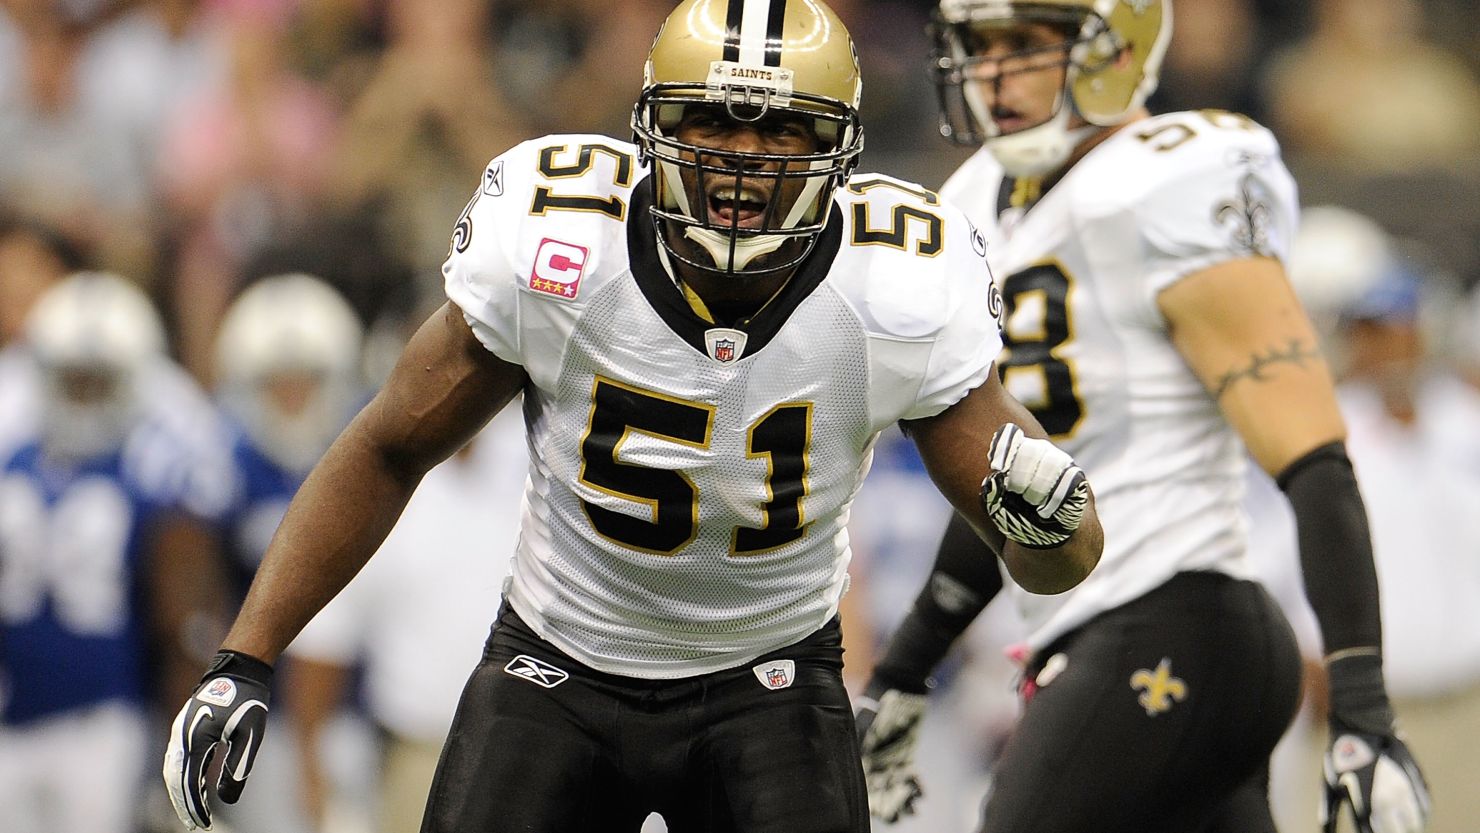 Jonathan Vilma wants a hearing this week about his suspension in light of the "bounty" suspension.